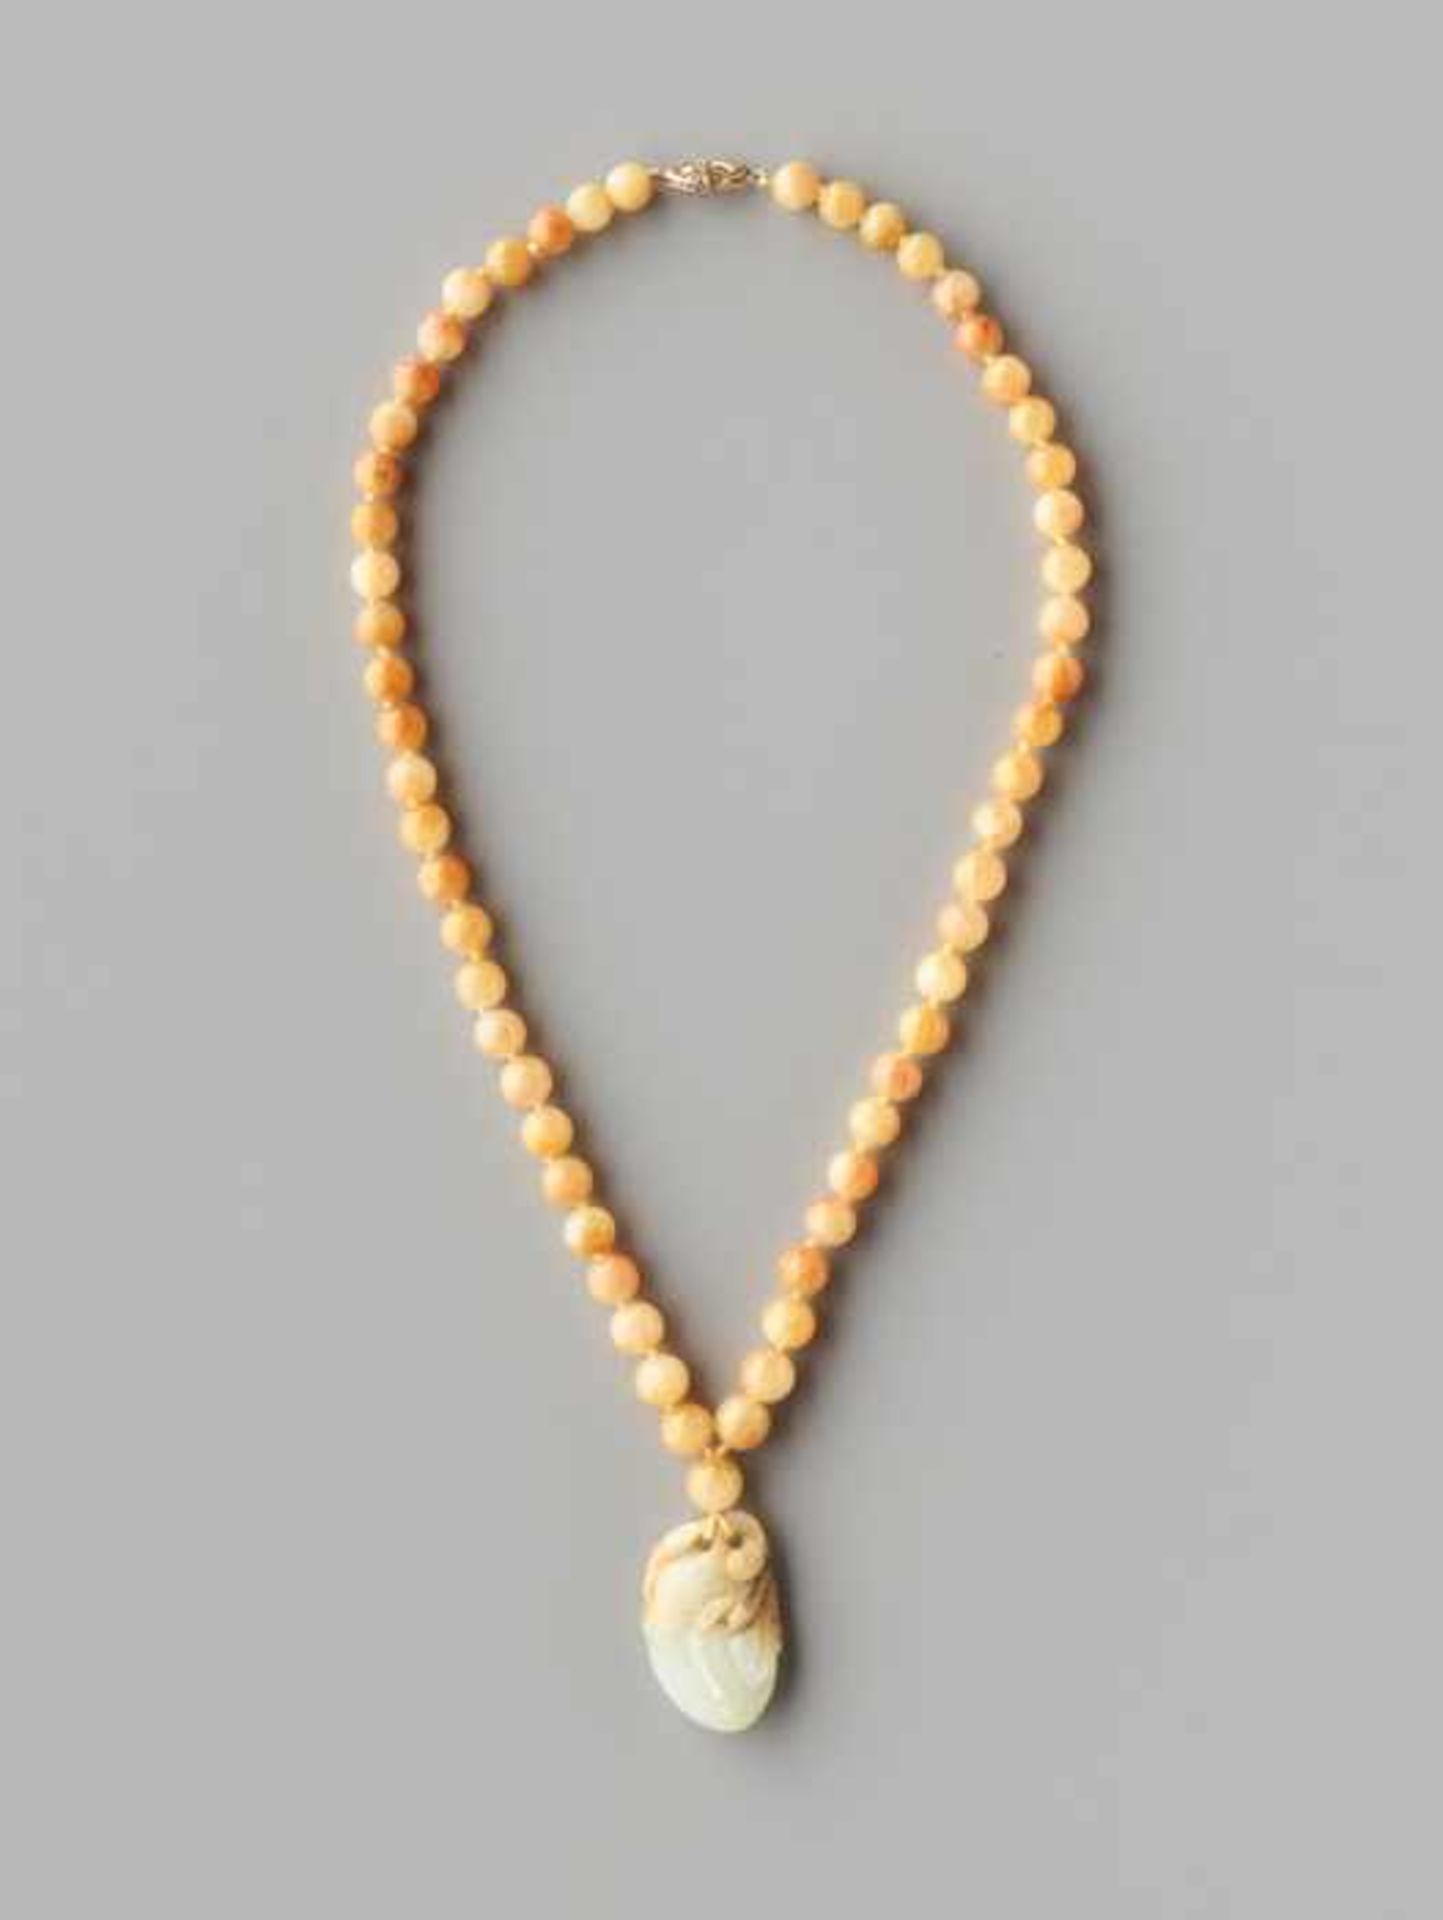 A YELLOW JADEITE NECKLACE WITH A NEPHRITE ‘PEACH’ PENDANT, 57 BEADS The 57 beads of natural fei - Image 2 of 4